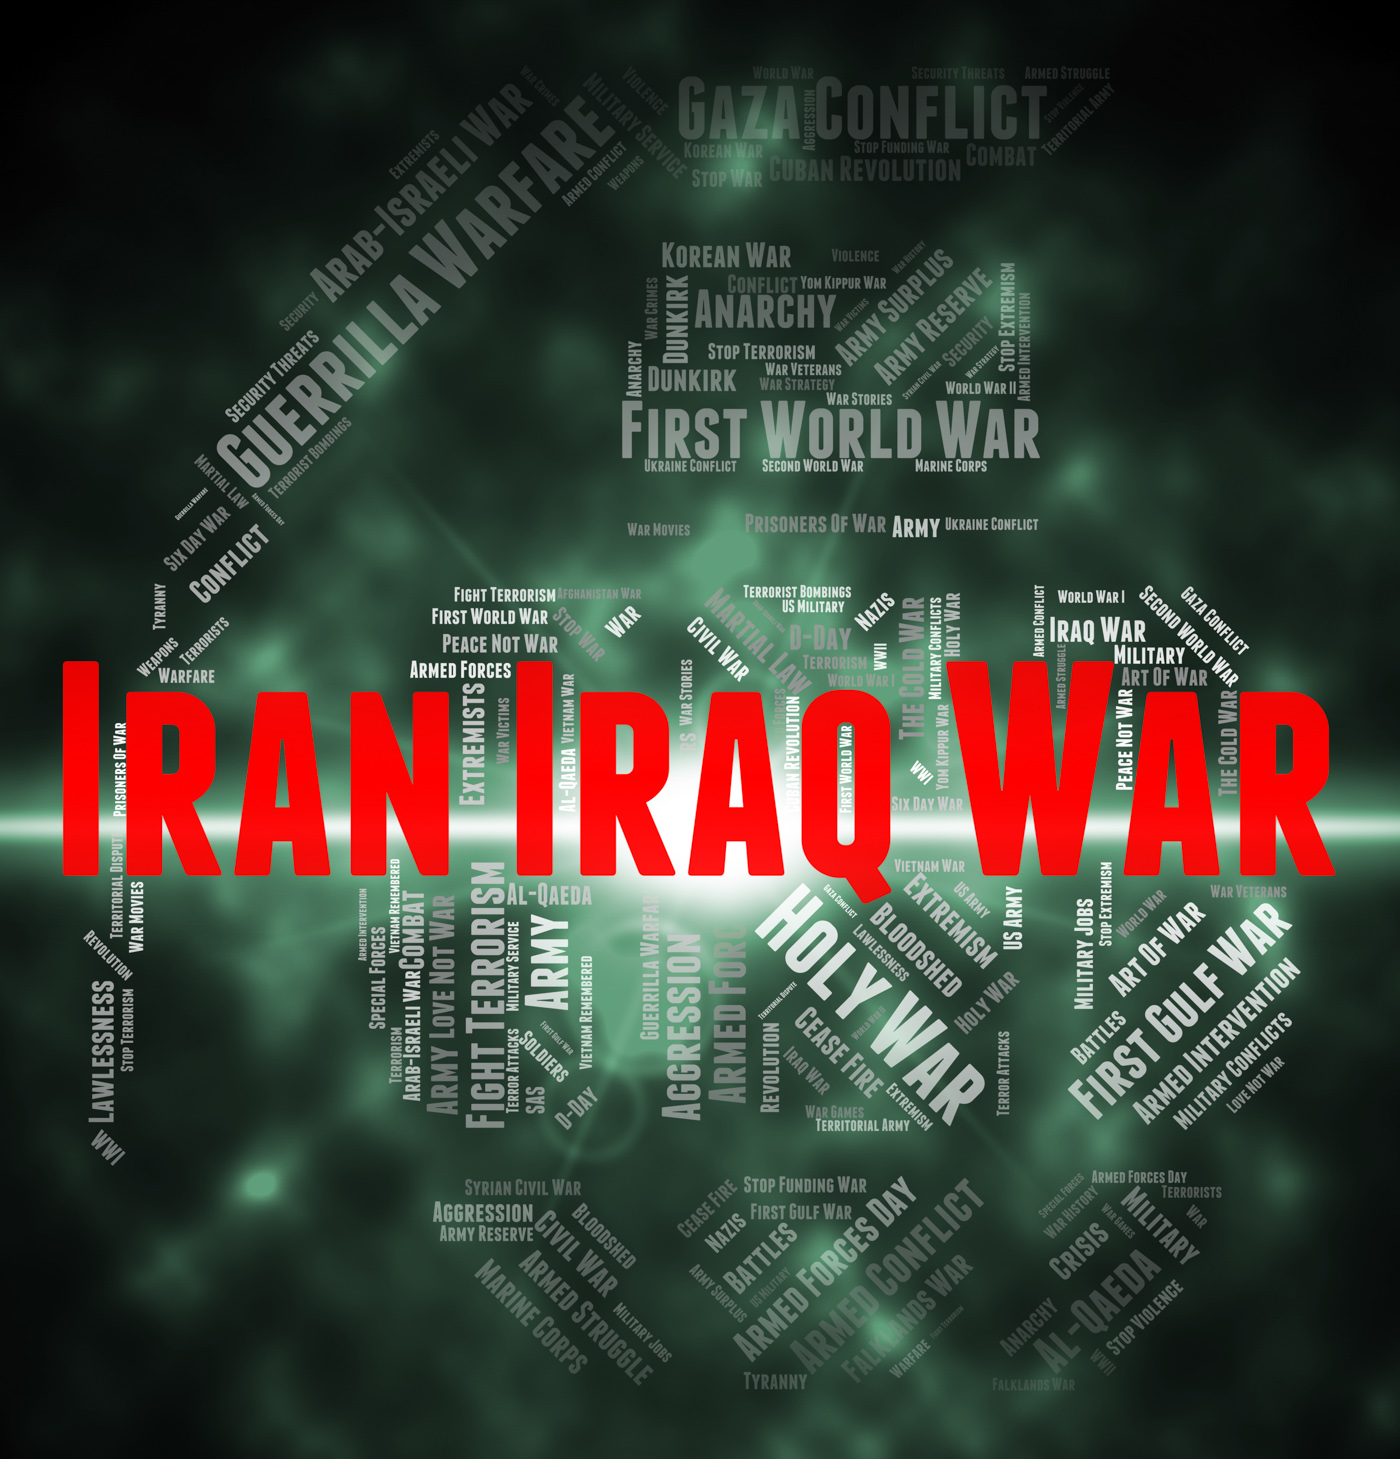 Iran iraq war shows military action and battle photo